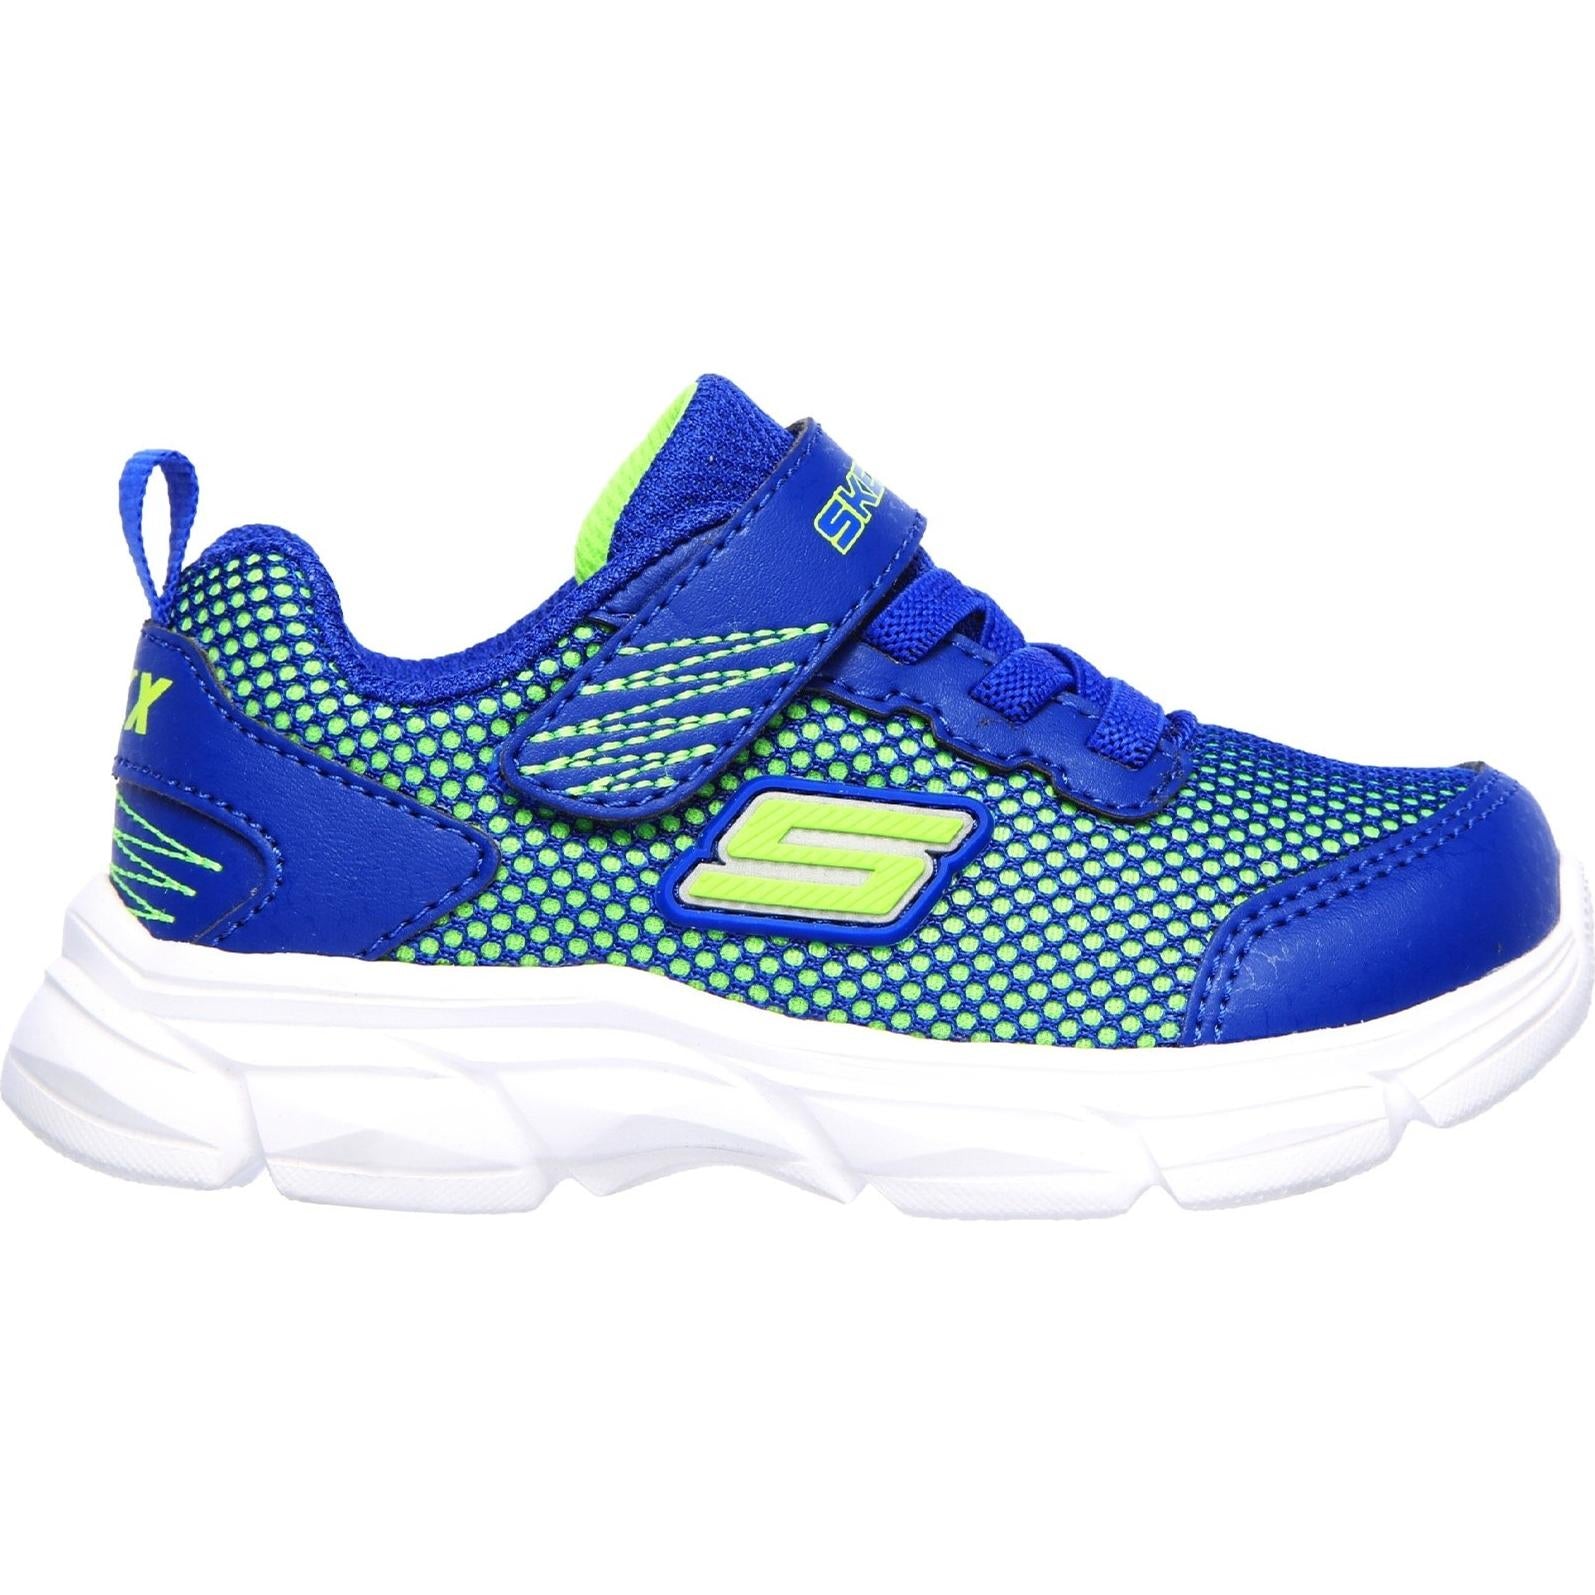 Skechers Advance-Intergrid Touch Fastening Strap Trainer with Two Layer Mesh Upper